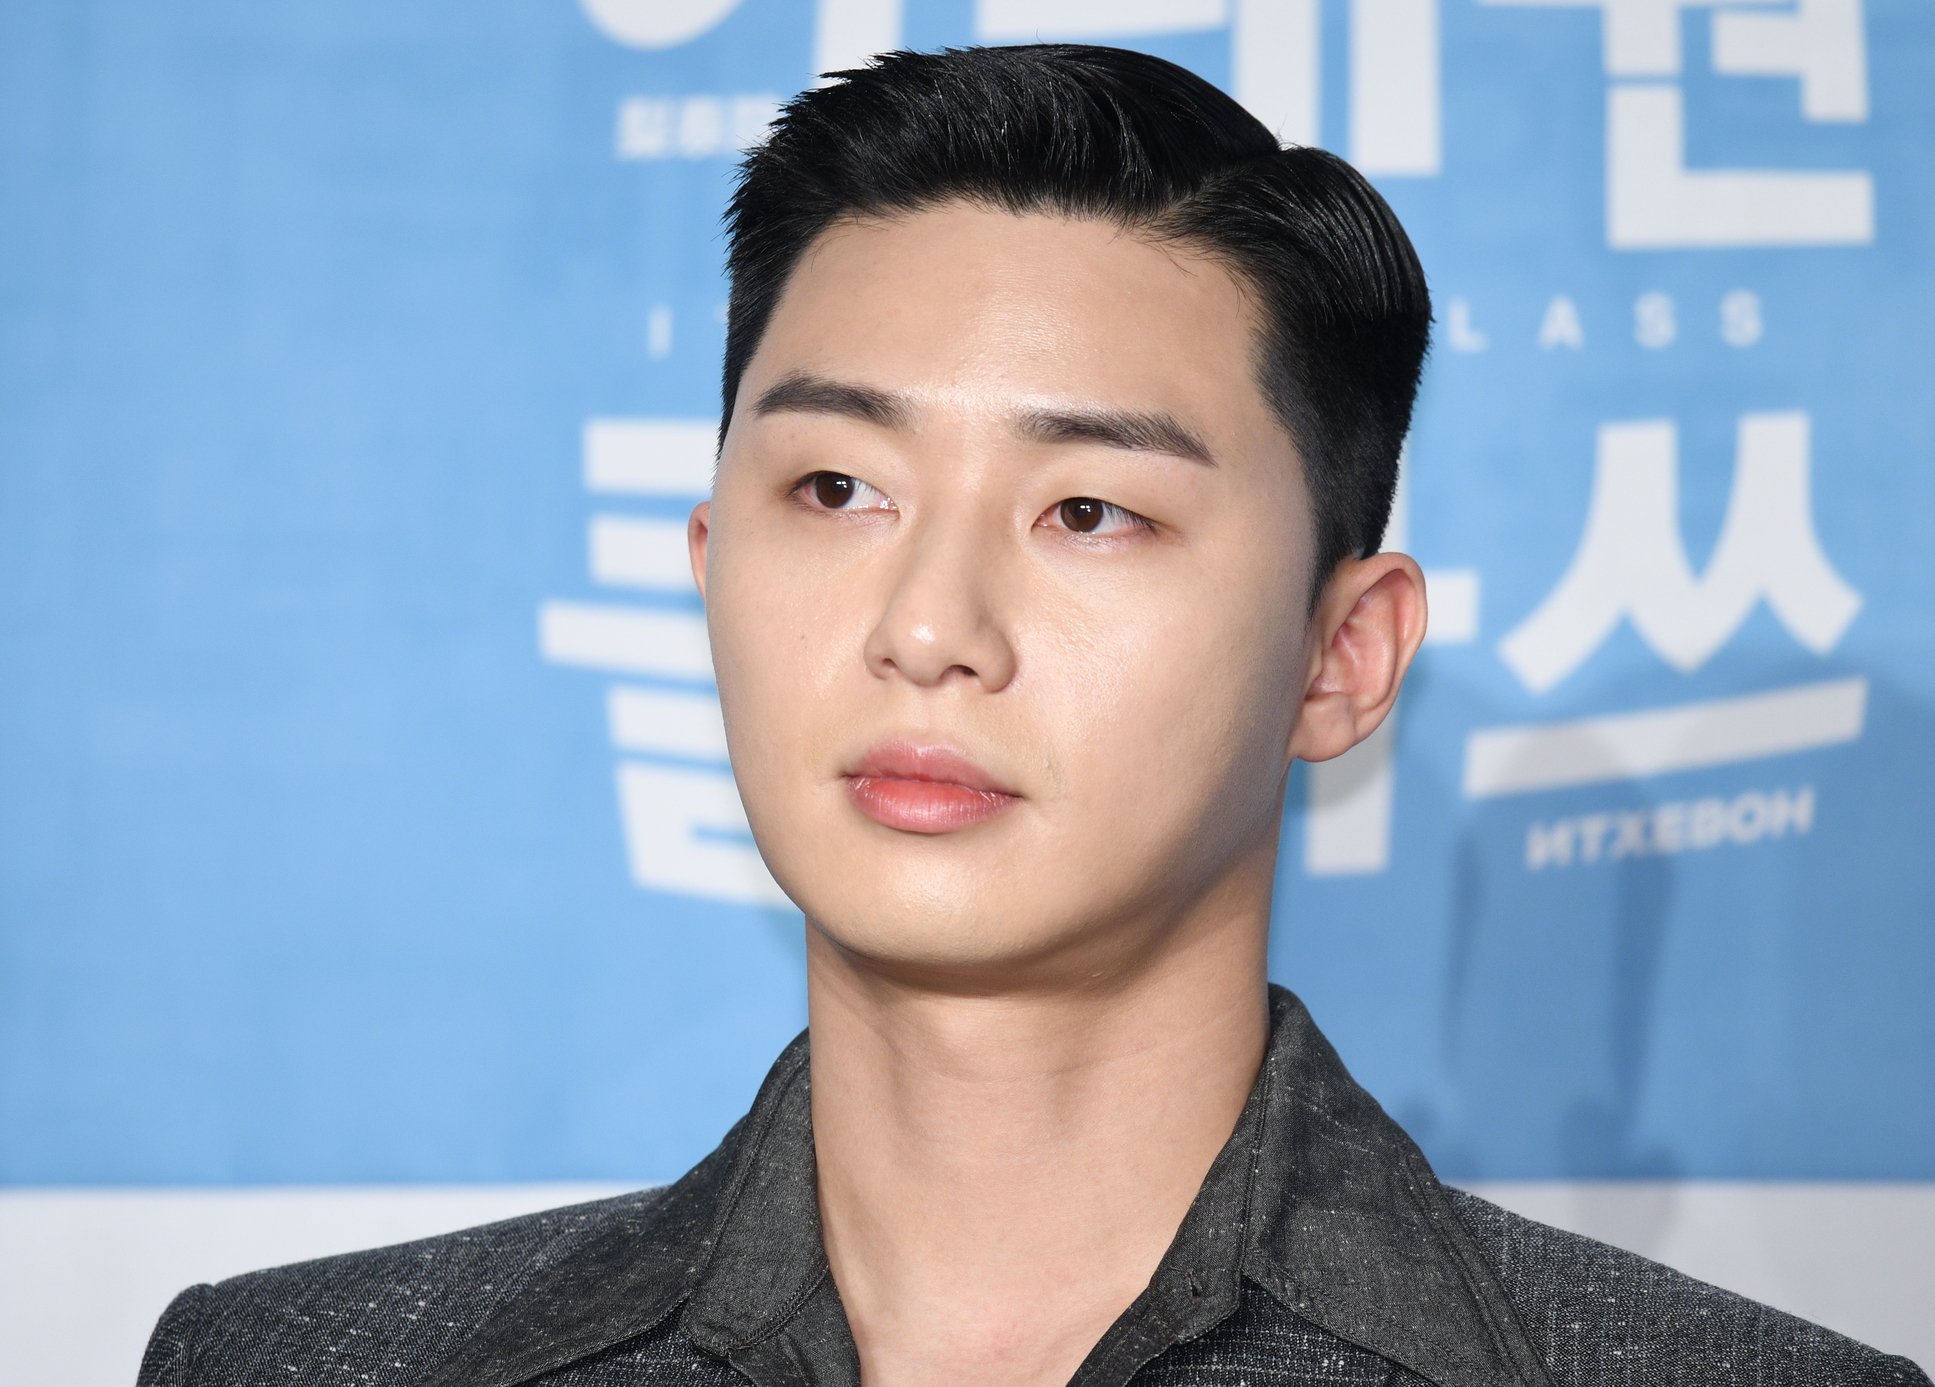 Park Seo-Joon 'Itaewon Class' wearing grey suit at conference